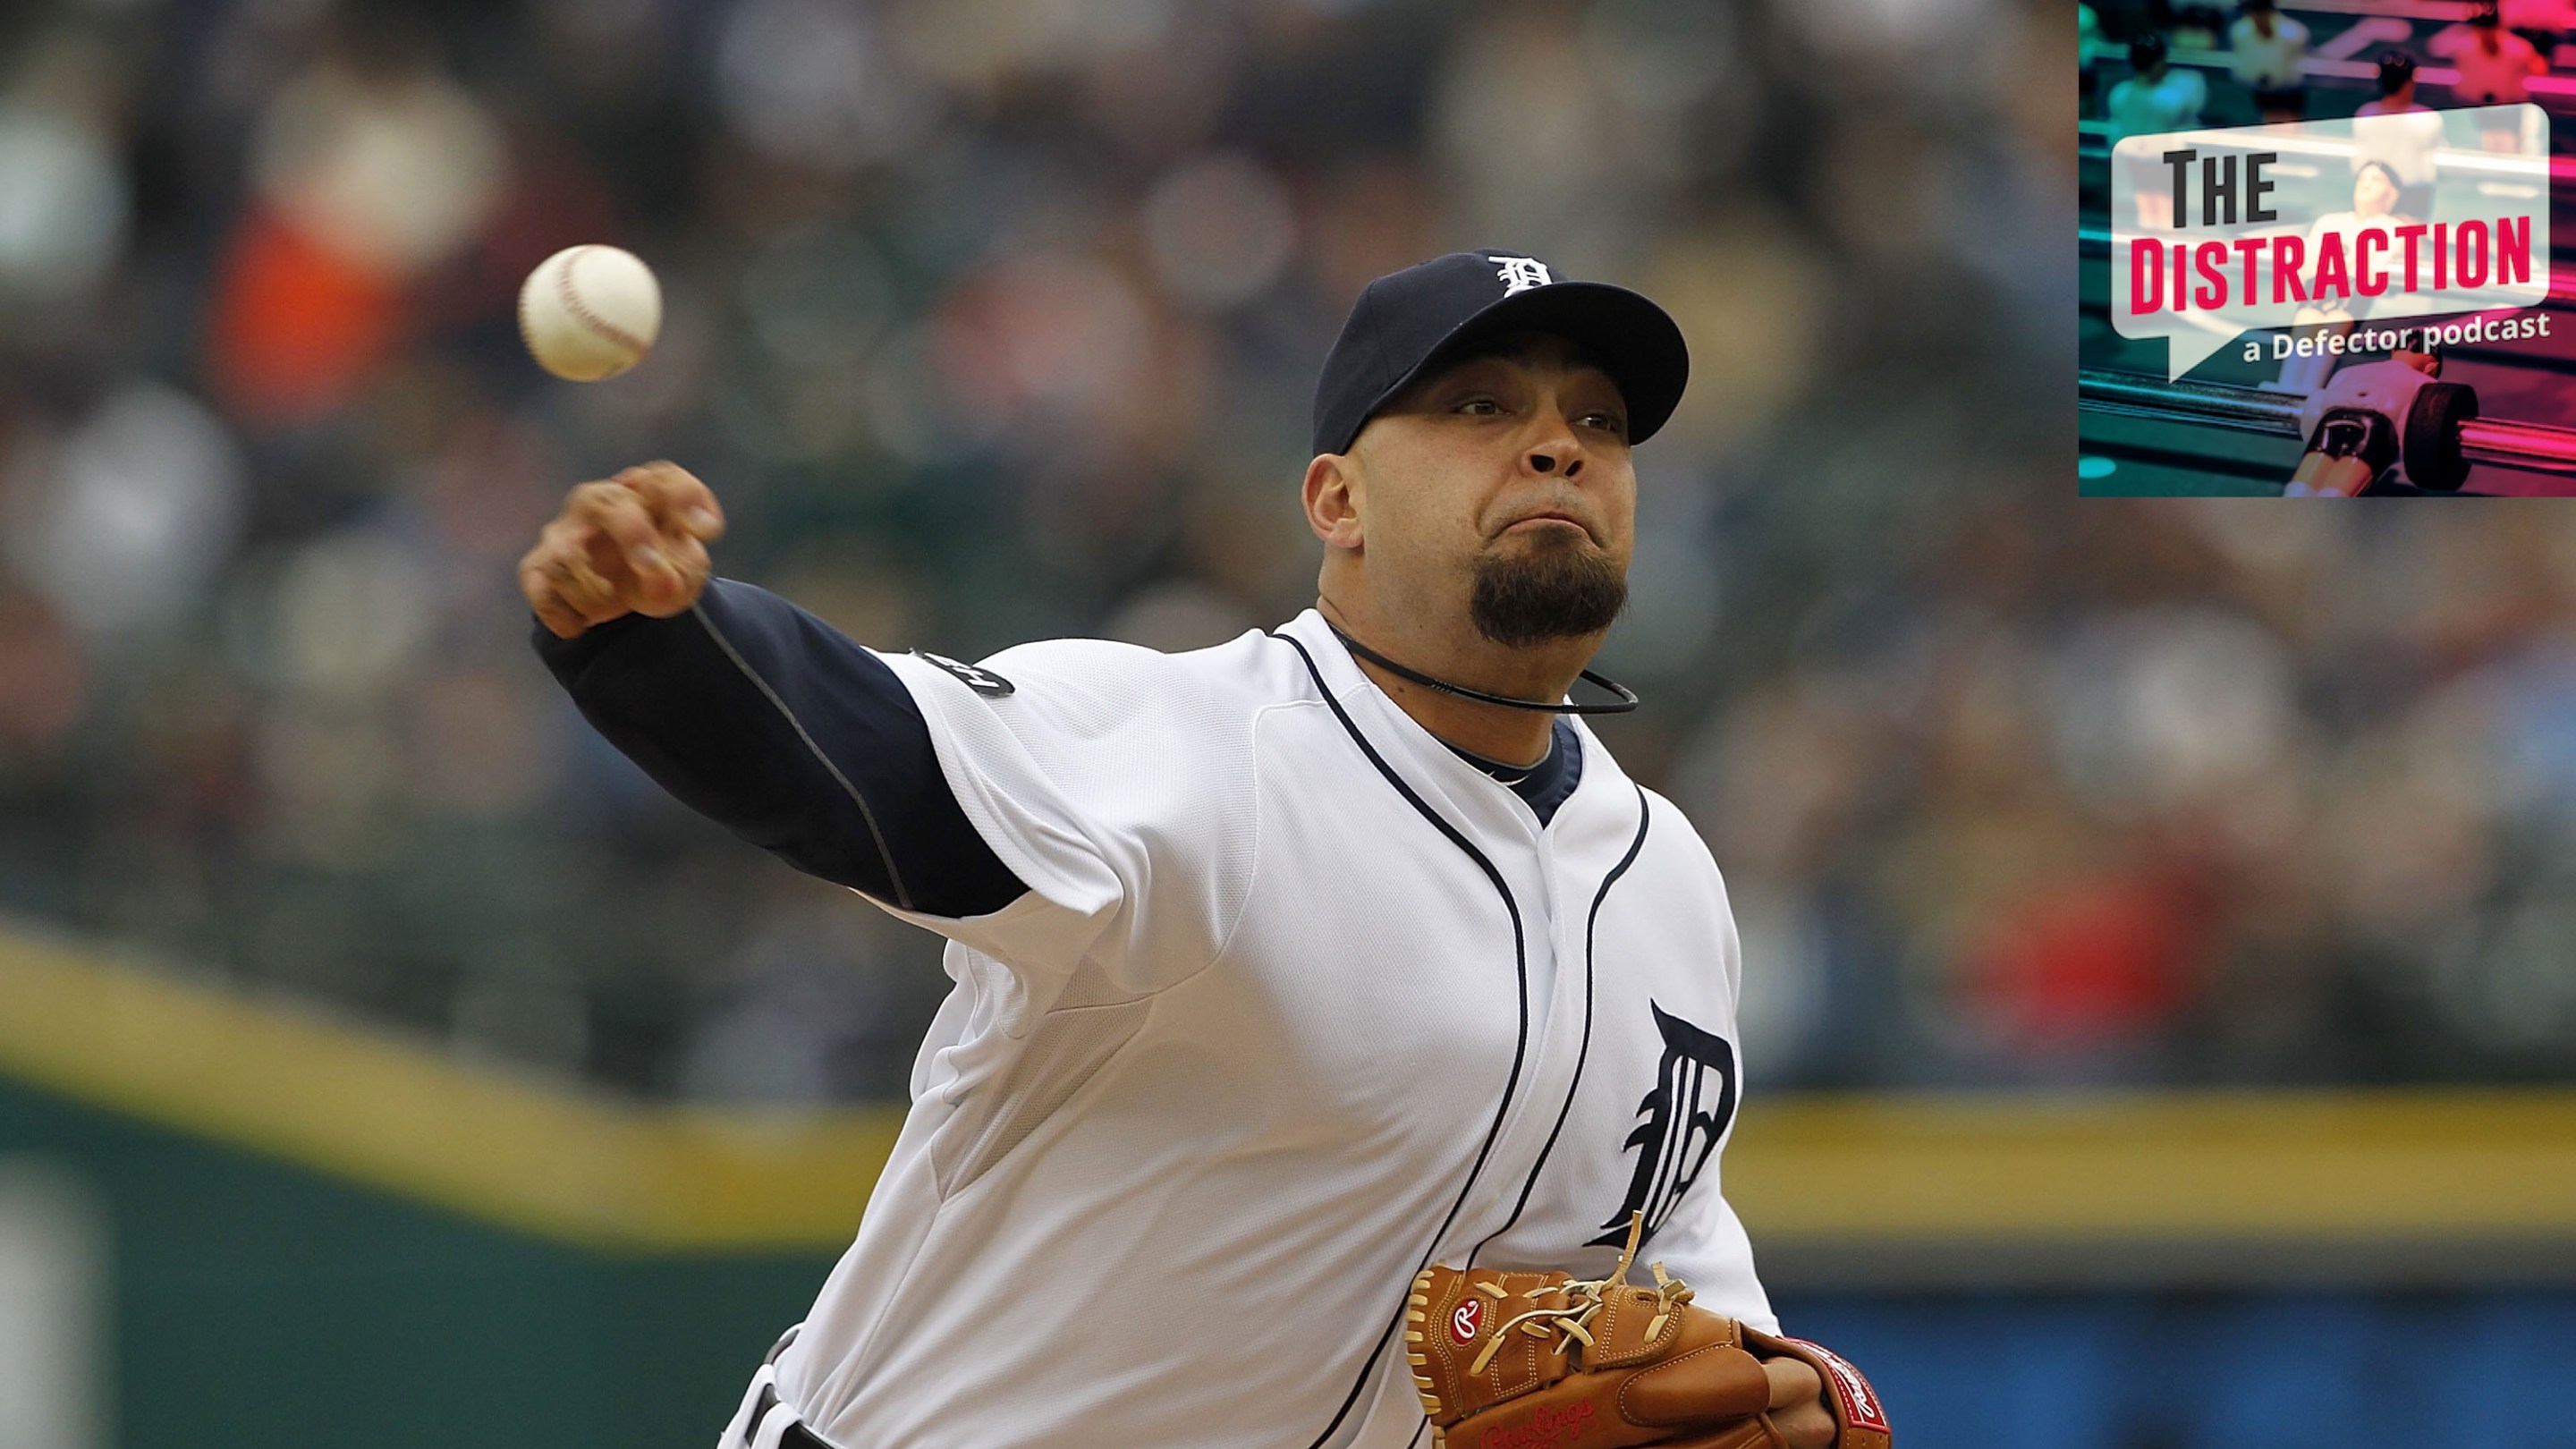 Joel Zumaya of the Detroit Tigers pitches in a game against the Yankees in May of 2010. The facial hair is outrageous.